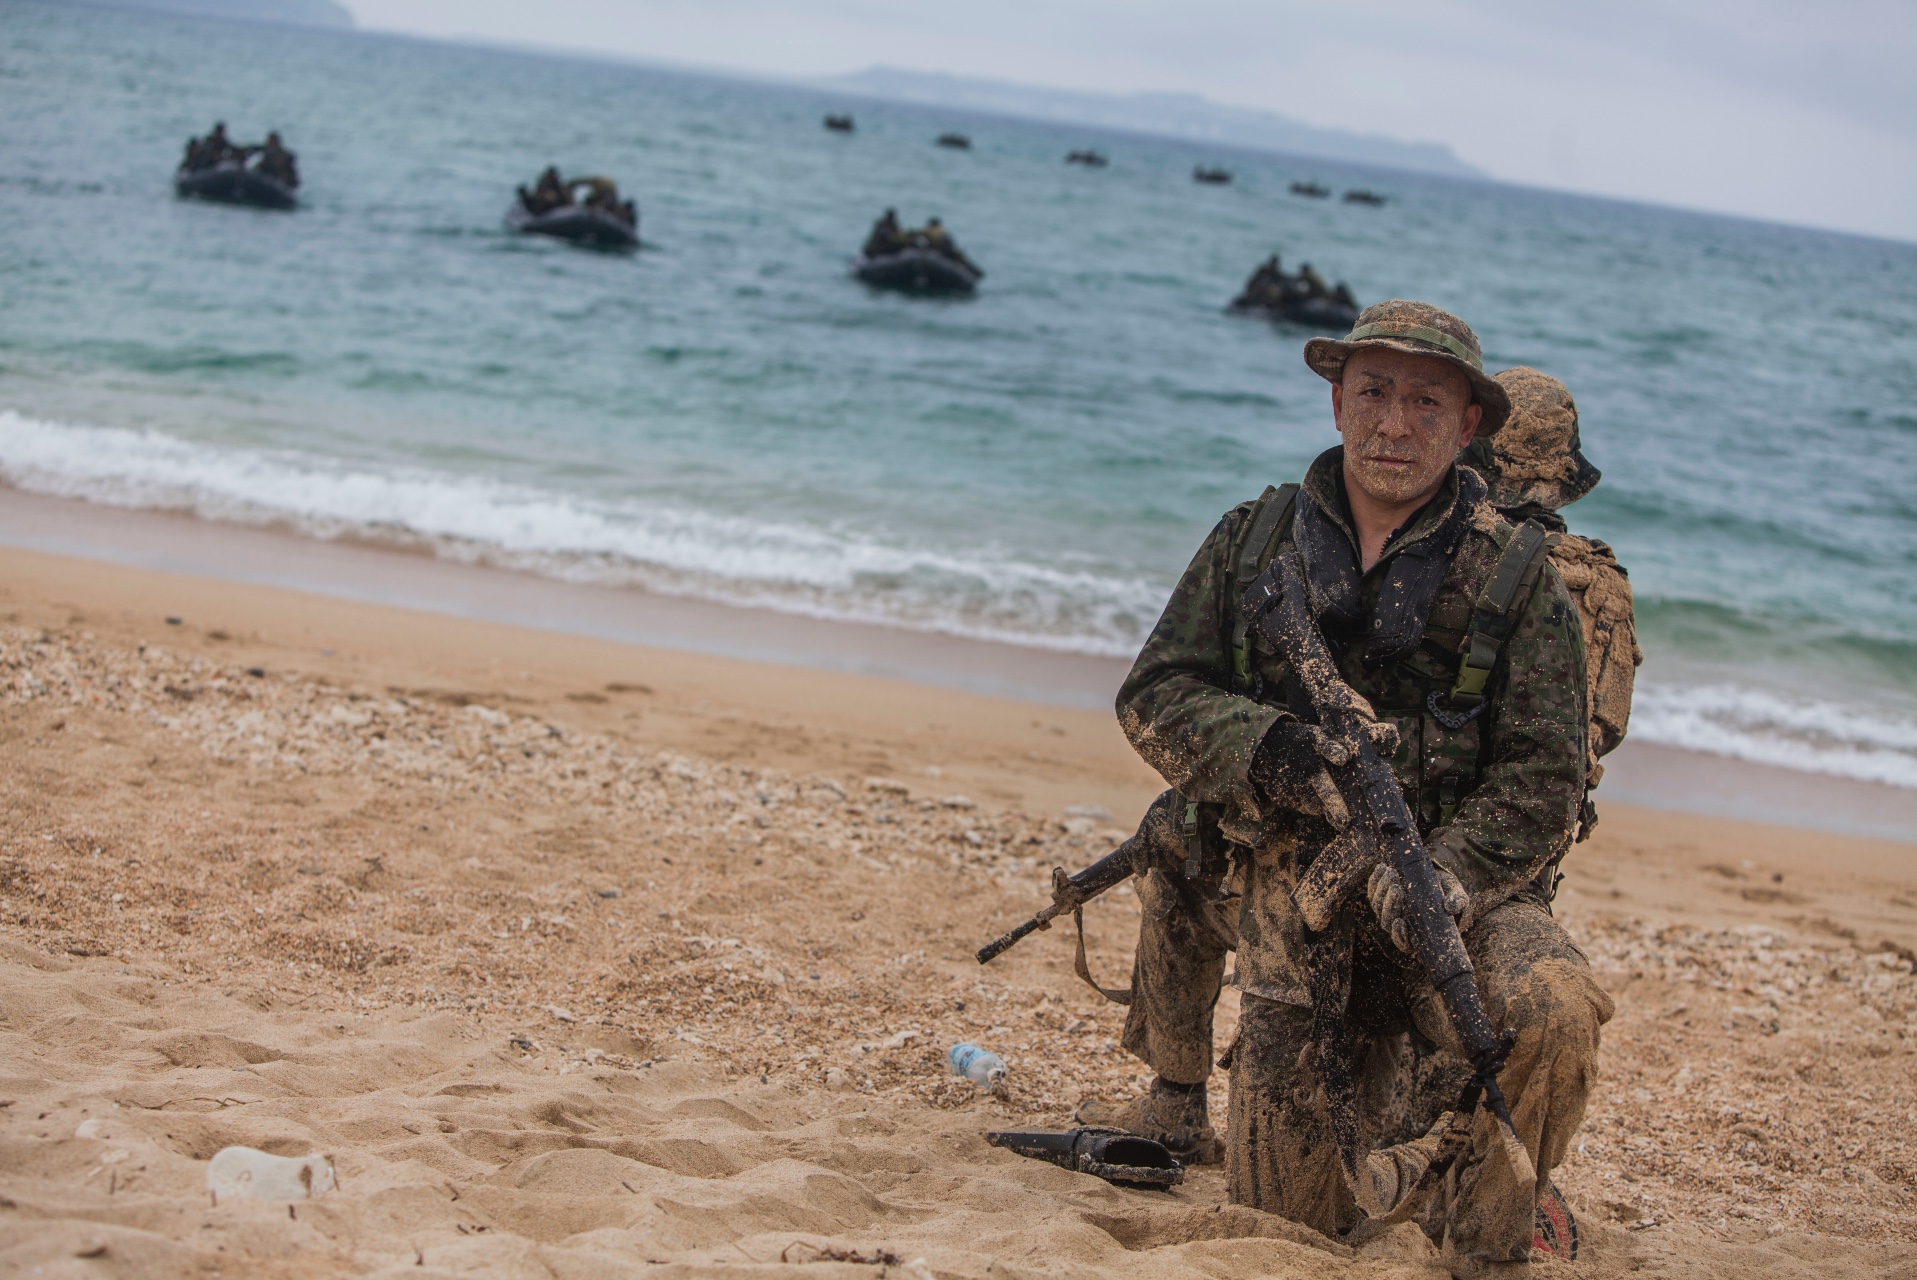 Scout swimmers with Japan Ground Self Defense Force (JGSDF) provide security during boat operations as part of the Japan Observer Exchange Program on Kin Blue, Okinawa, April 28, 2015